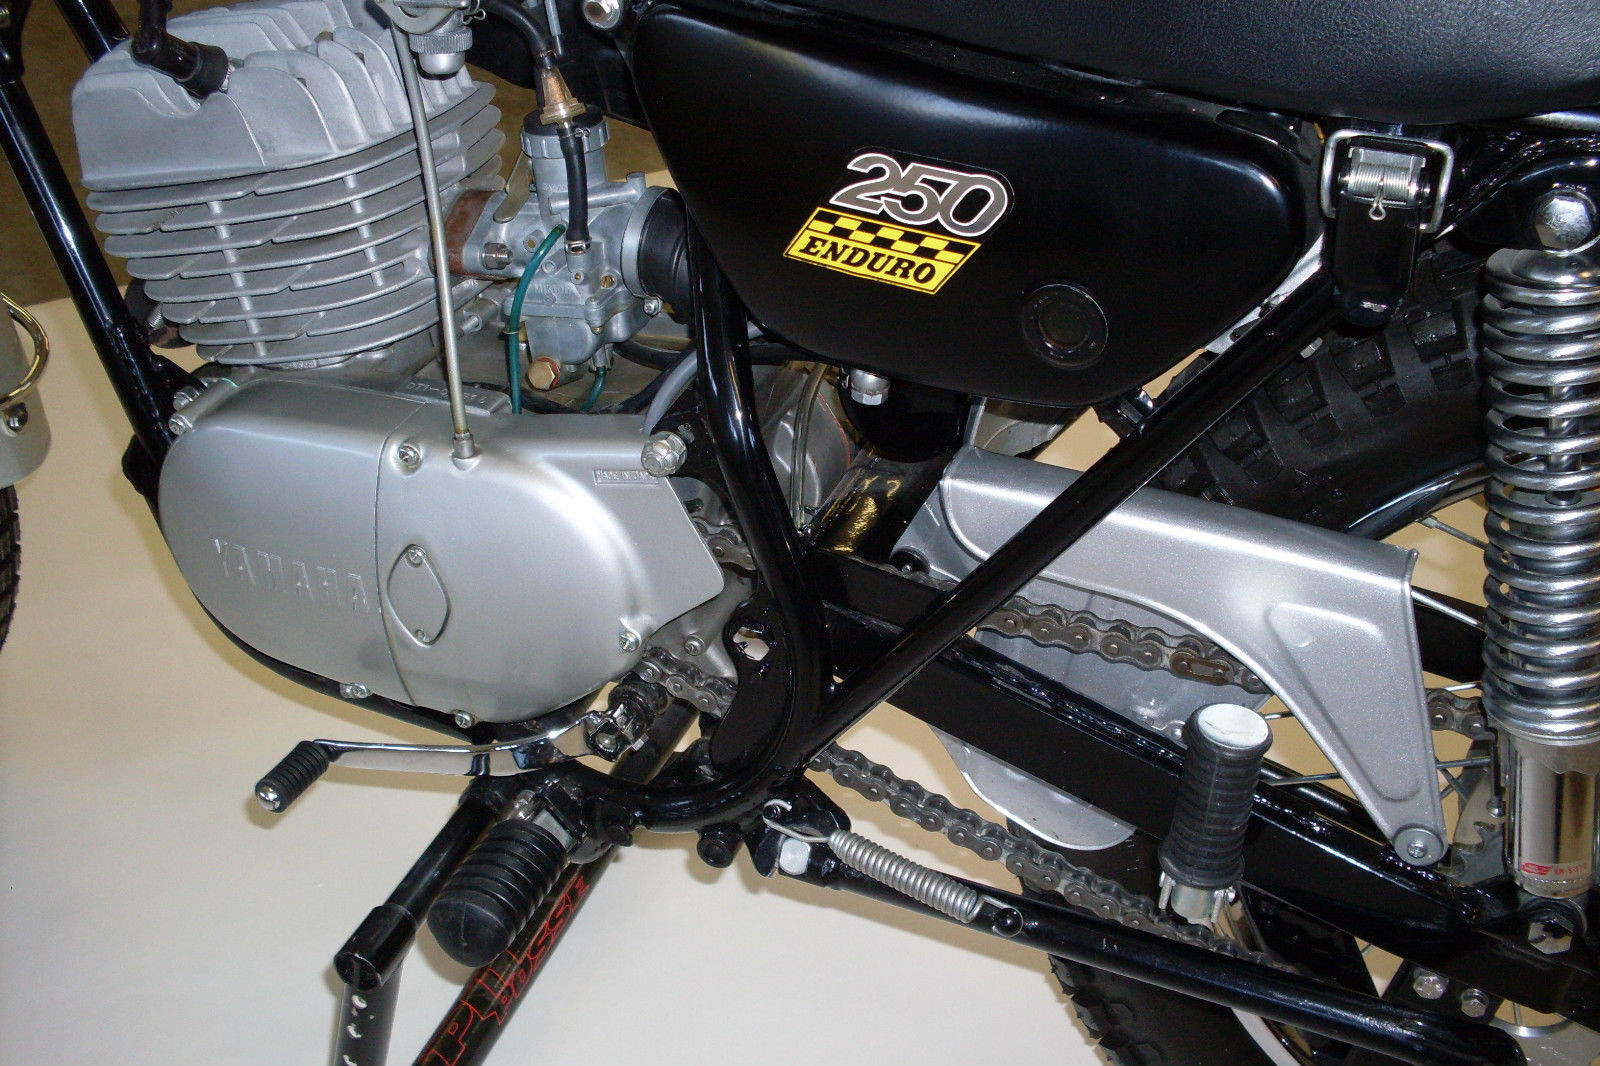 Yamaha DT1 250 - 1968 - Chain Guard, Gear Lever, Sprocket Cover and Side Panel.